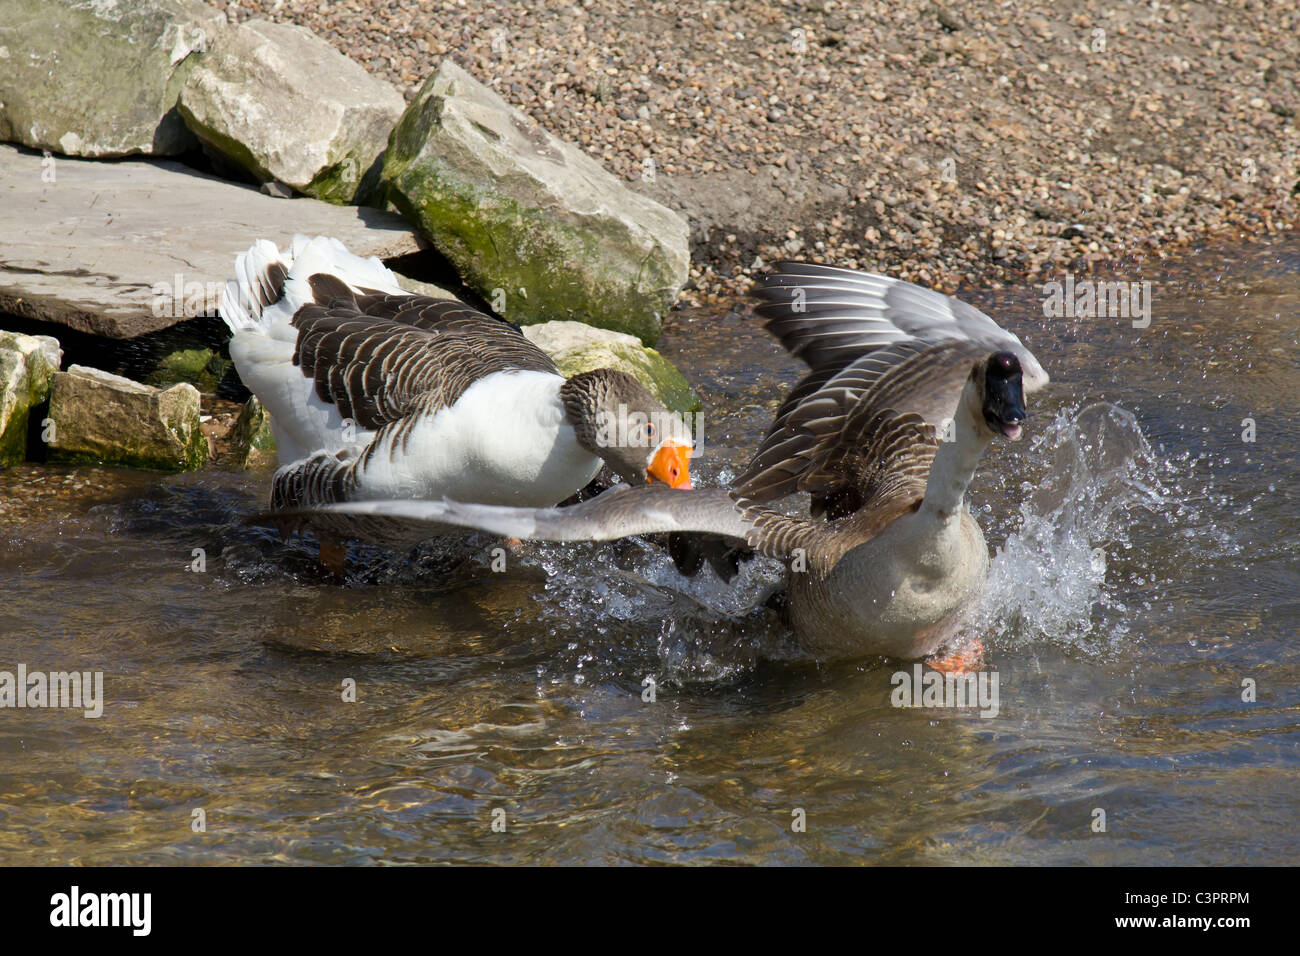 An irrate goose attacking an Egyptian goose simply, it seems, because it had attacked a duck! Stock Photo